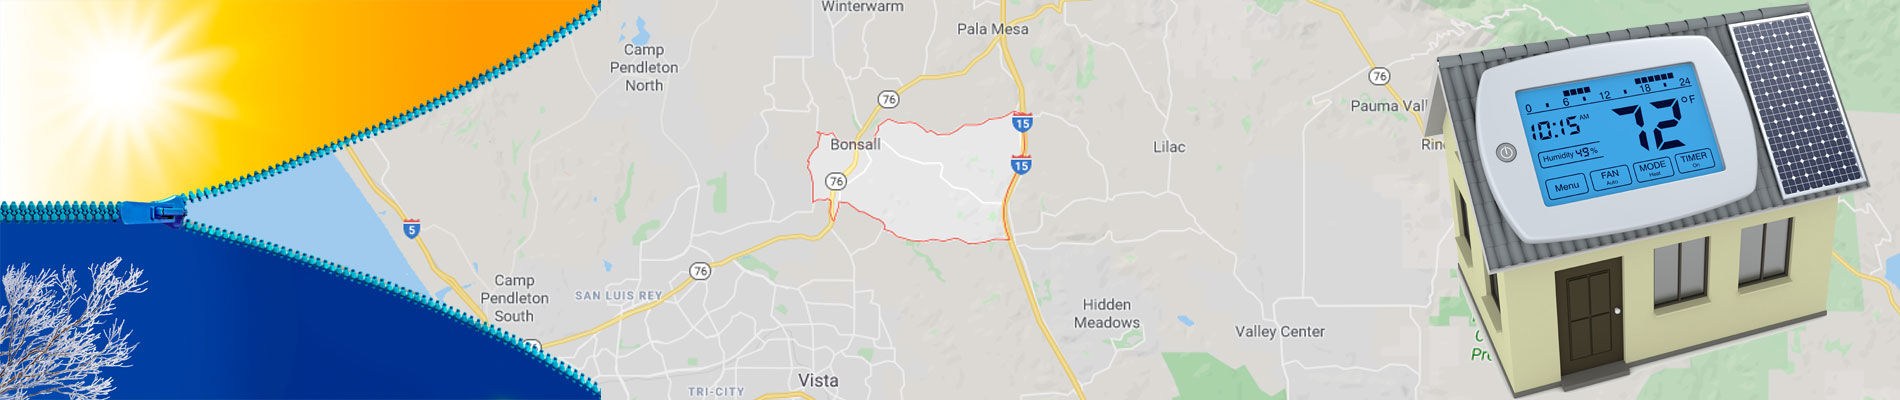 Bonsall, California Air Conditioning Services